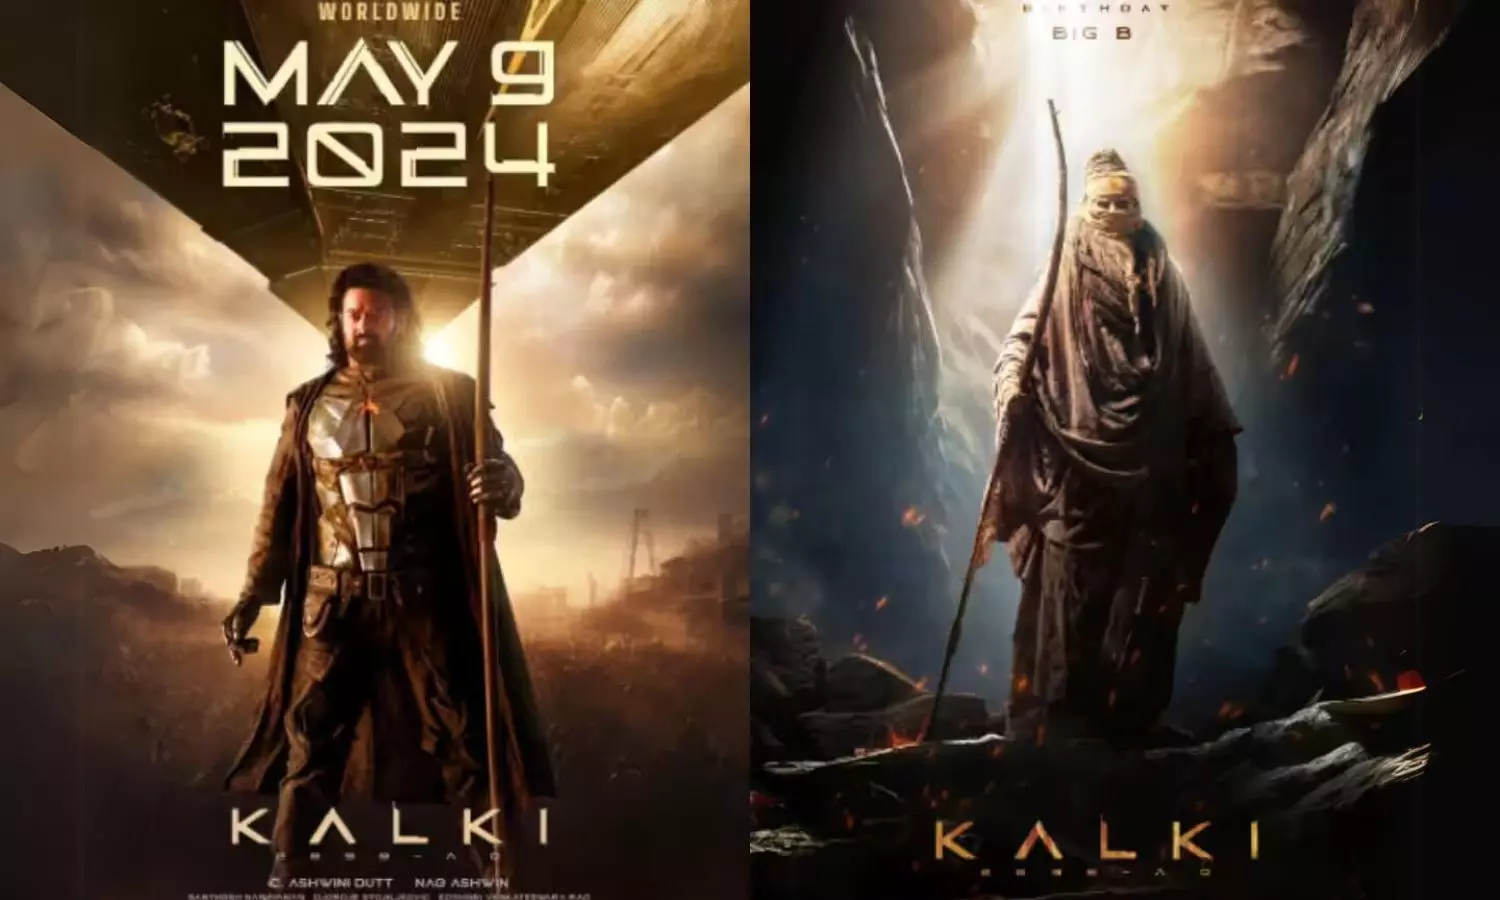 Its a wrap for ‘Kalki 2898 AD,’ epic Sci-Fi film gears up for release